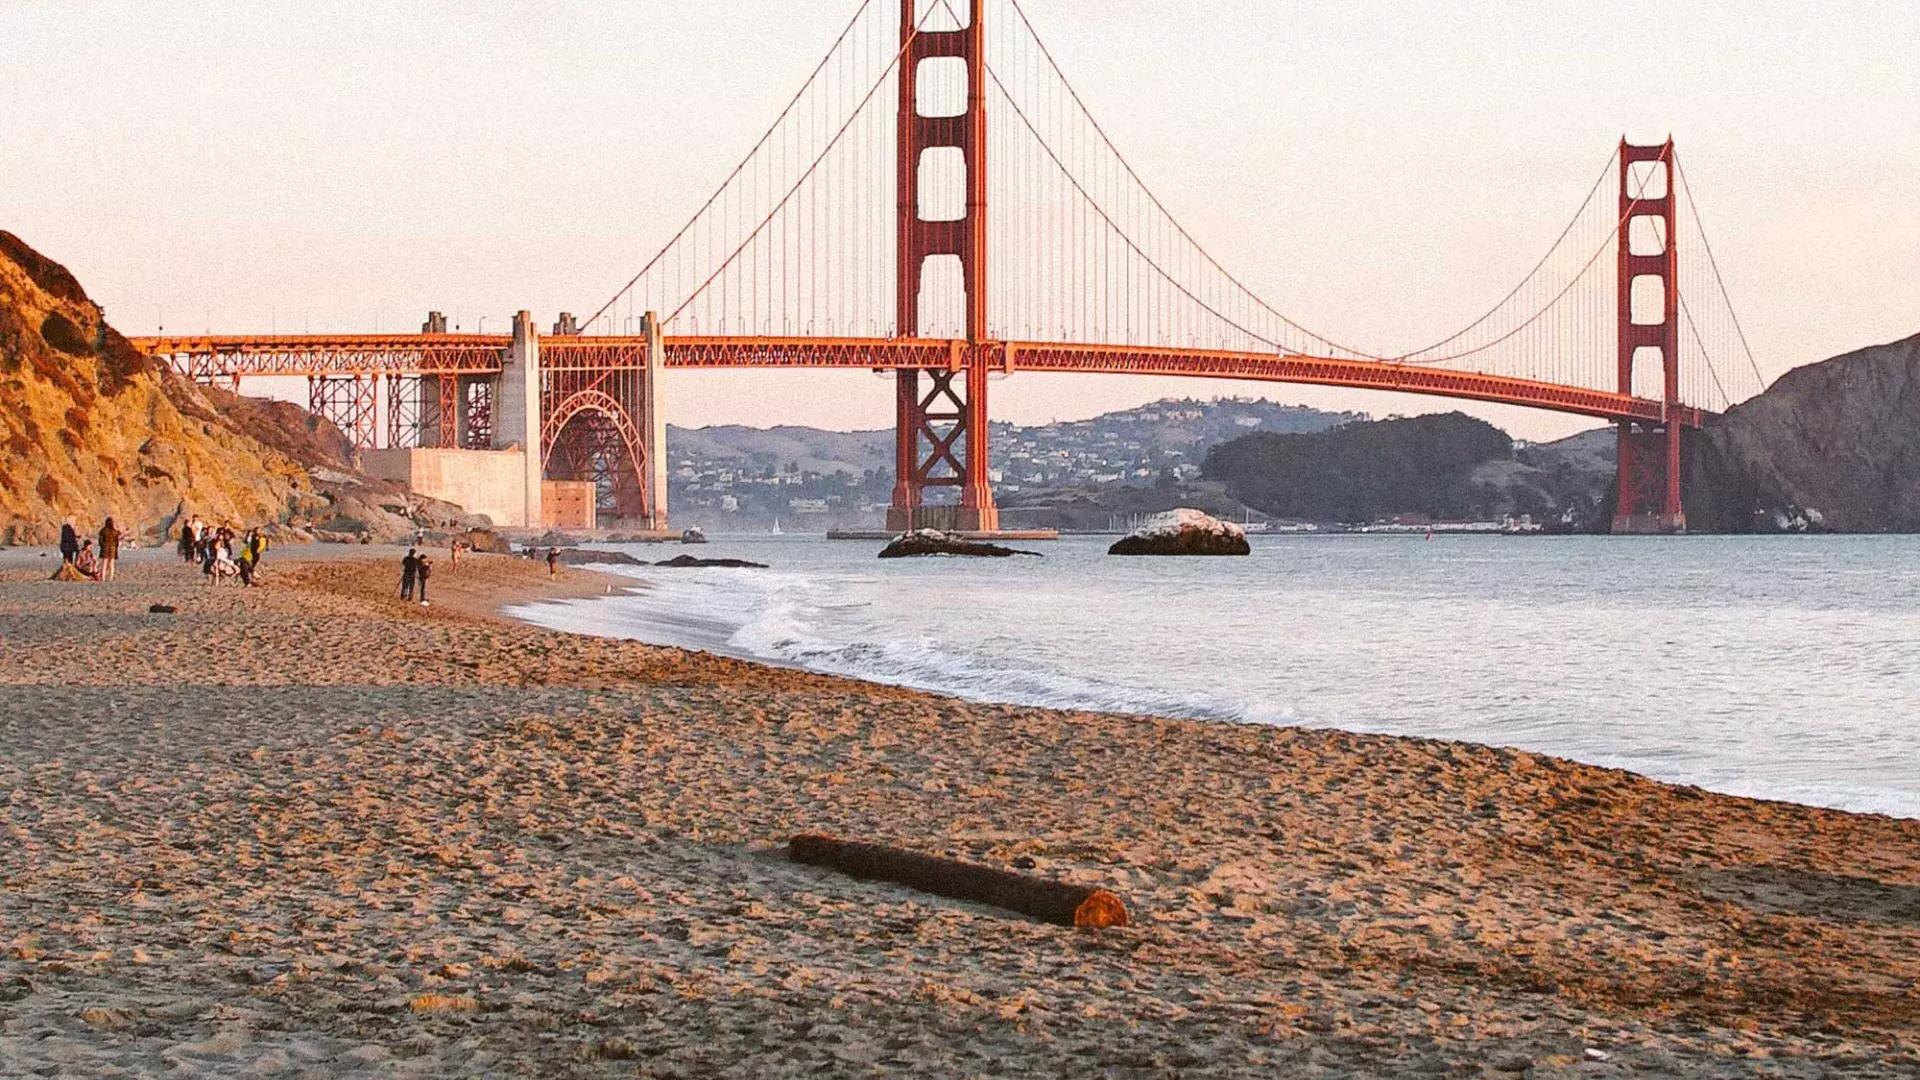 San Francisco's Baker Beach is pictured with the Golden Gate Bridge in the background